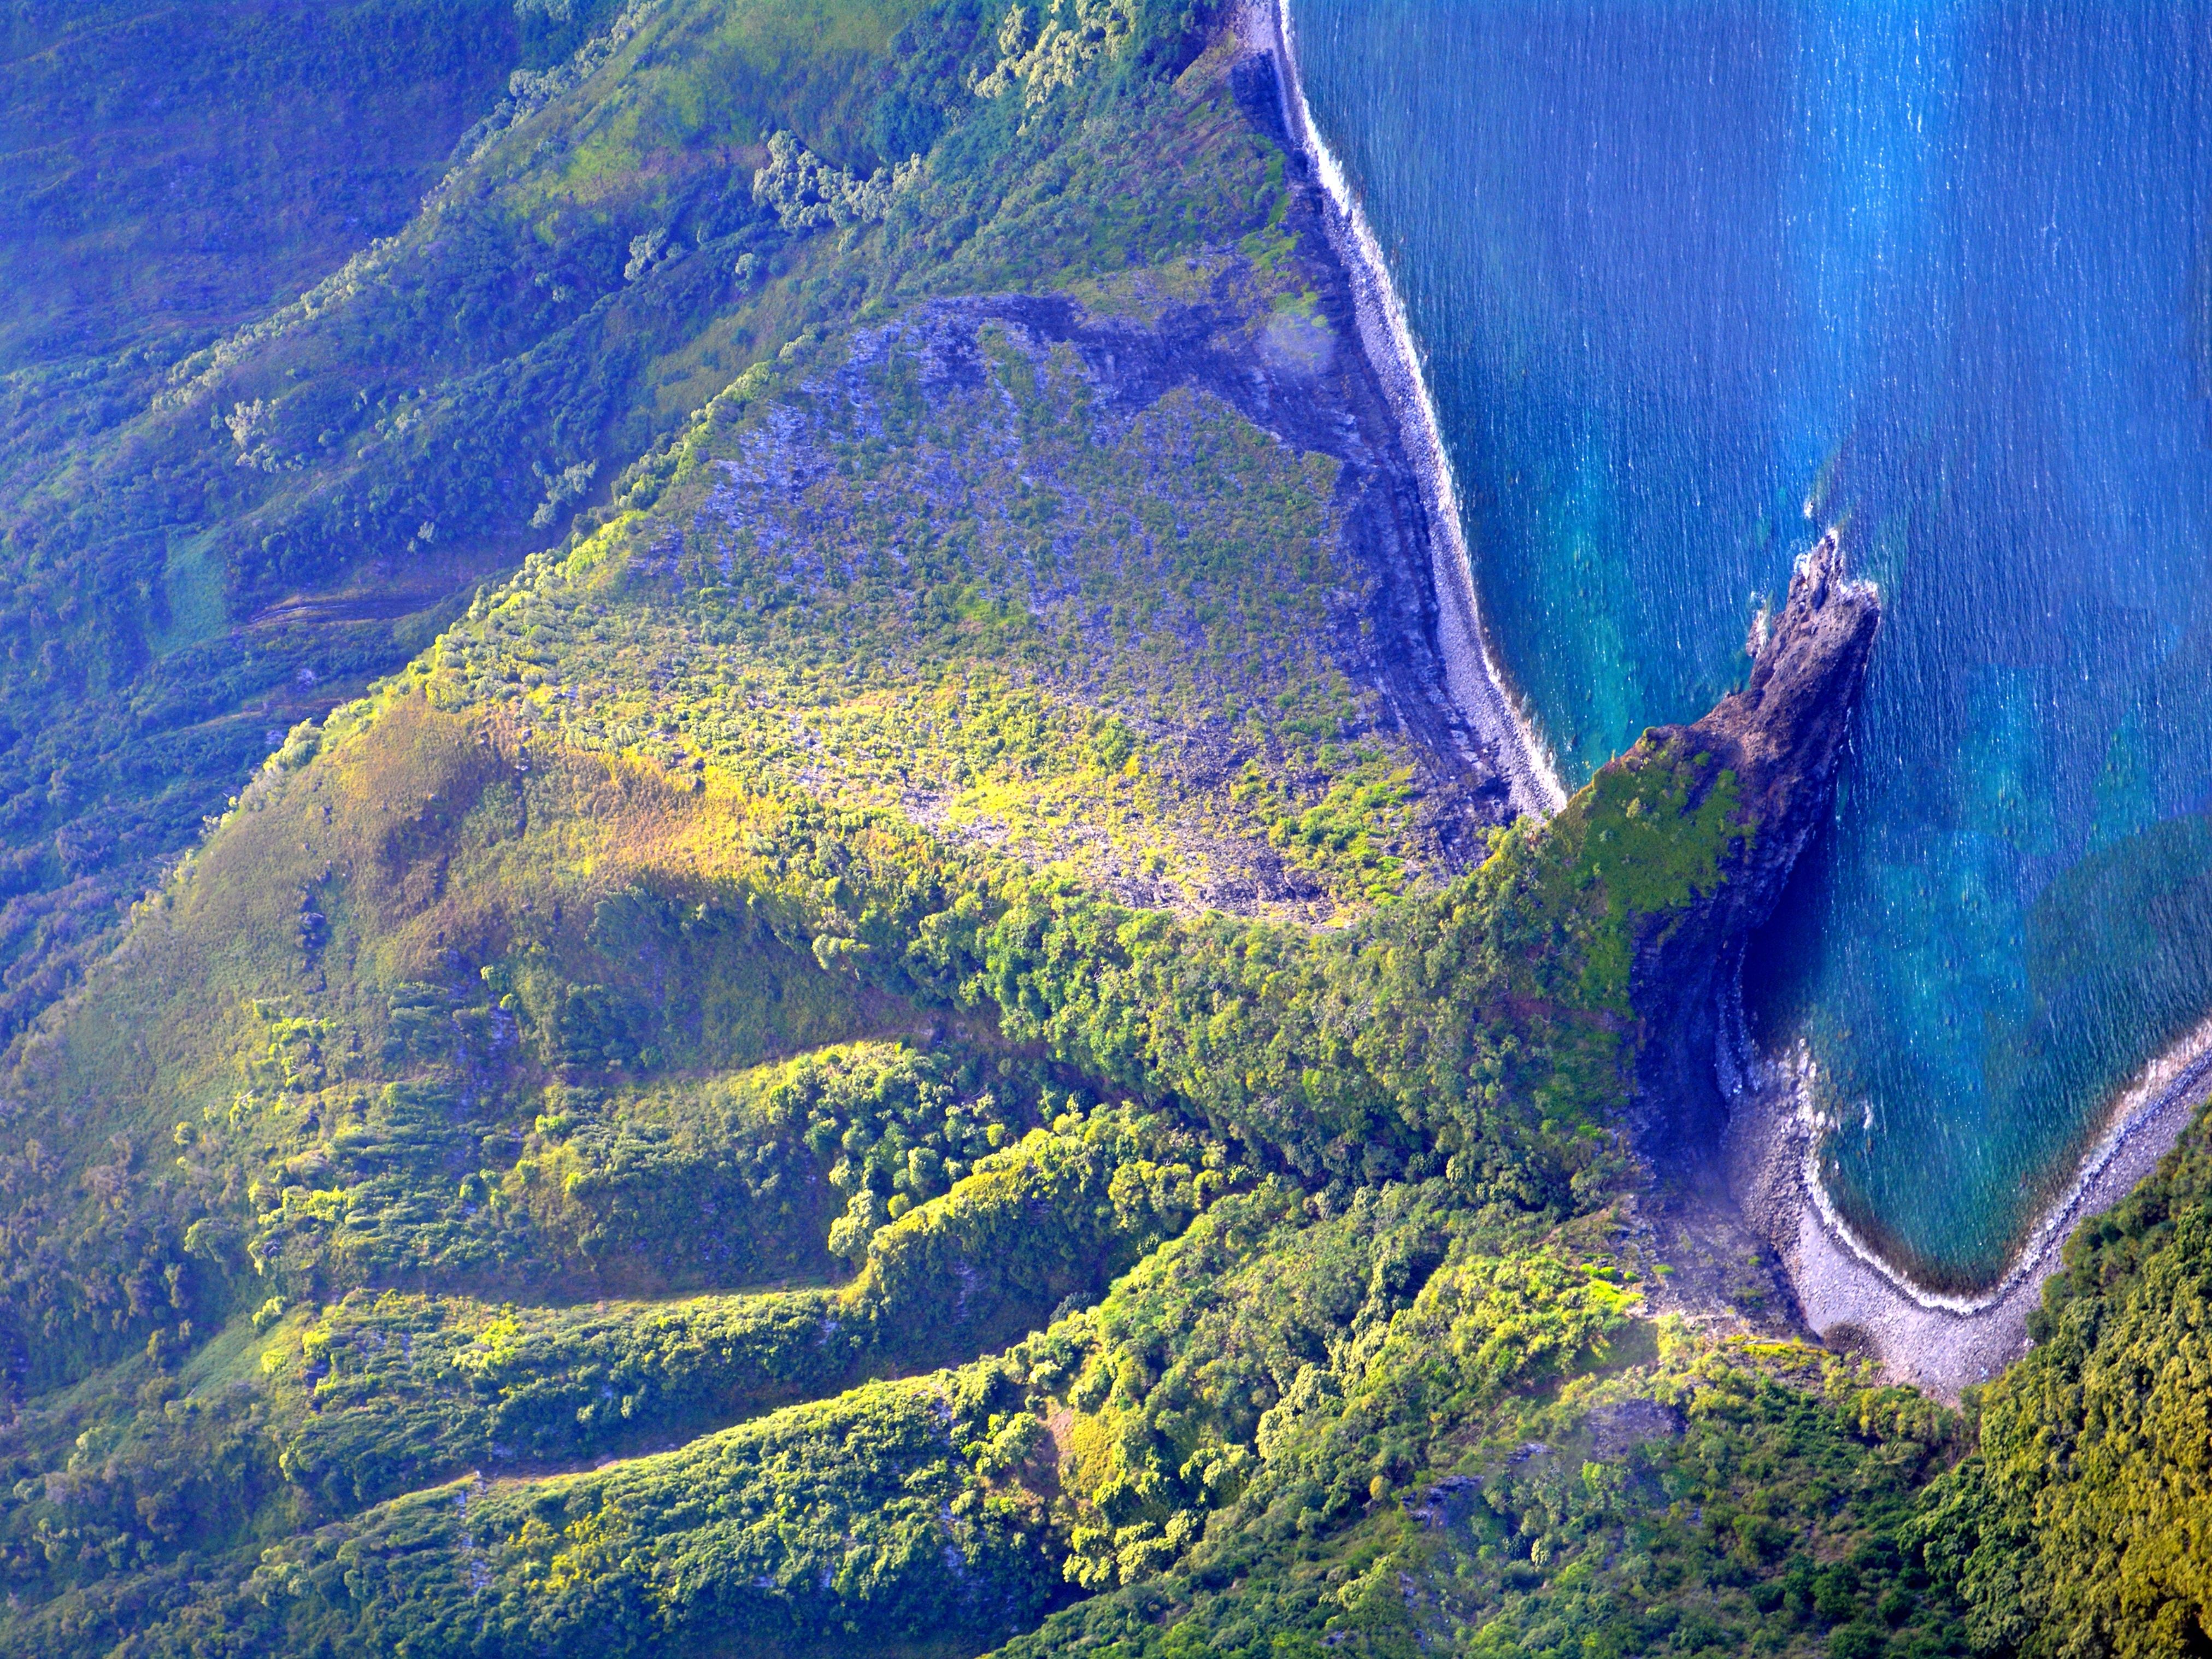 a great family activity to do in Maui is go on a helicopter tour